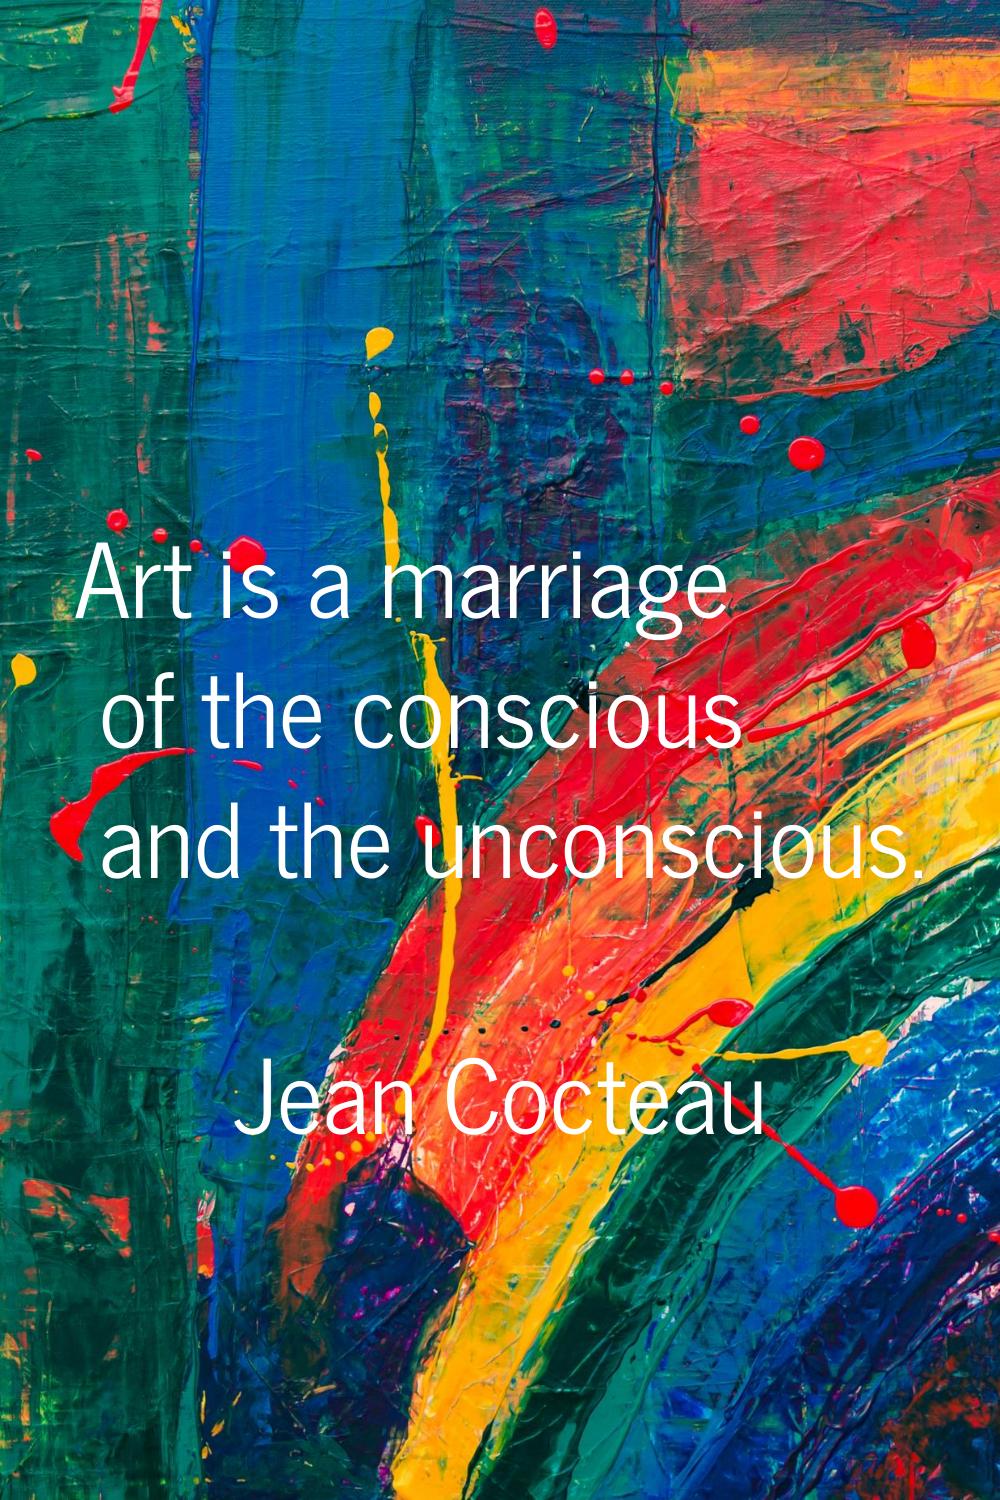 Art is a marriage of the conscious and the unconscious.